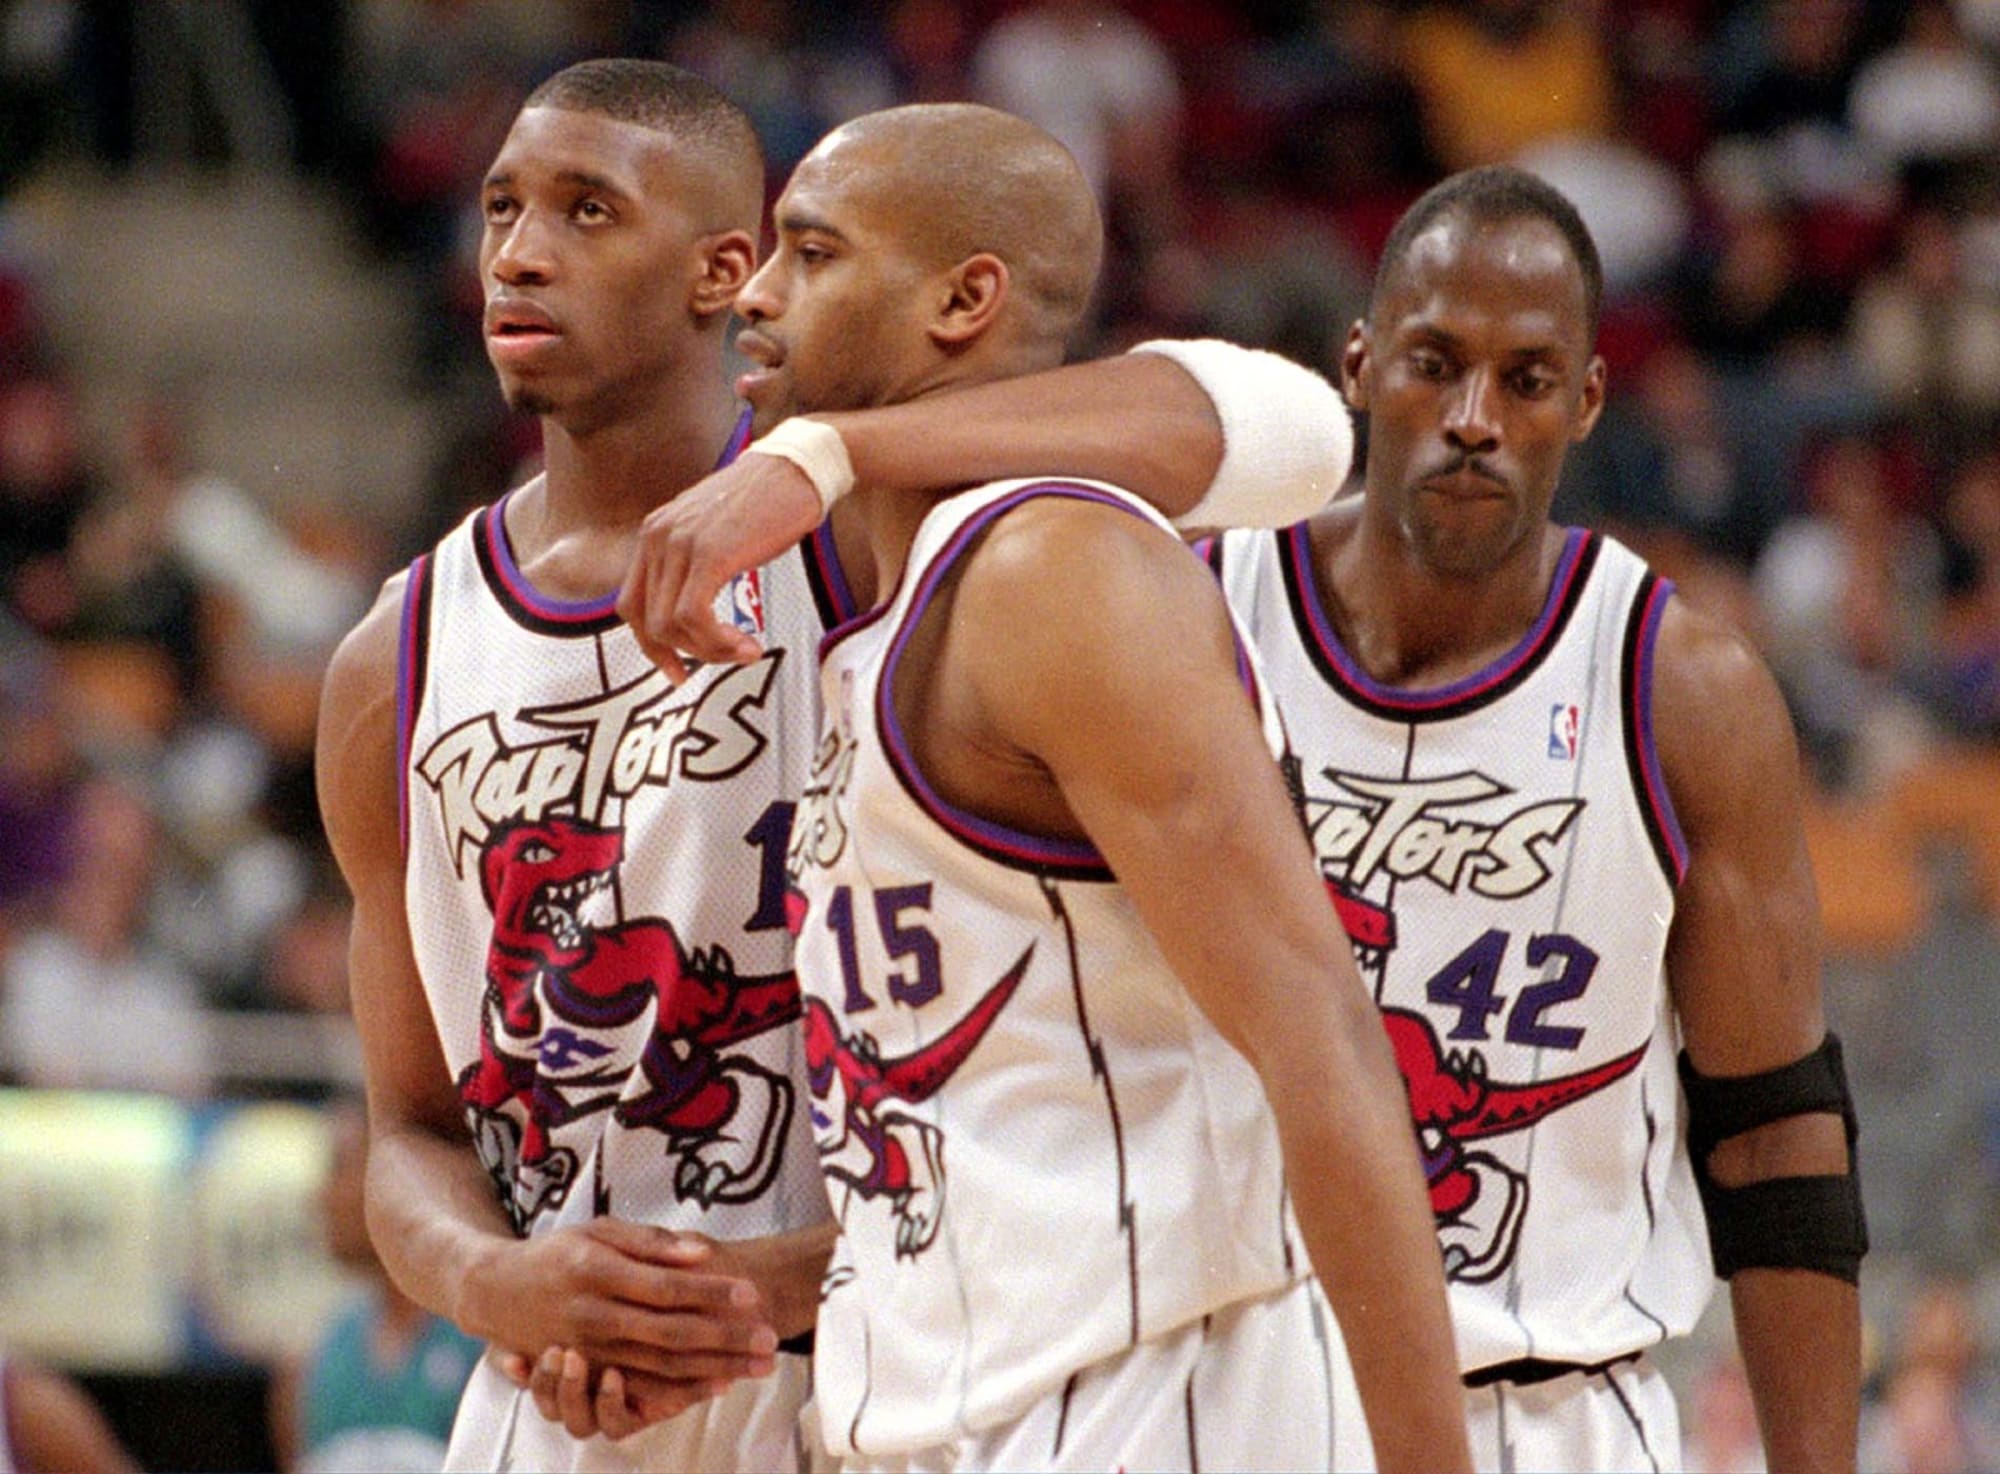 We had a 'Muggsy Bogues rule'” — Vince Carter on how the Toronto